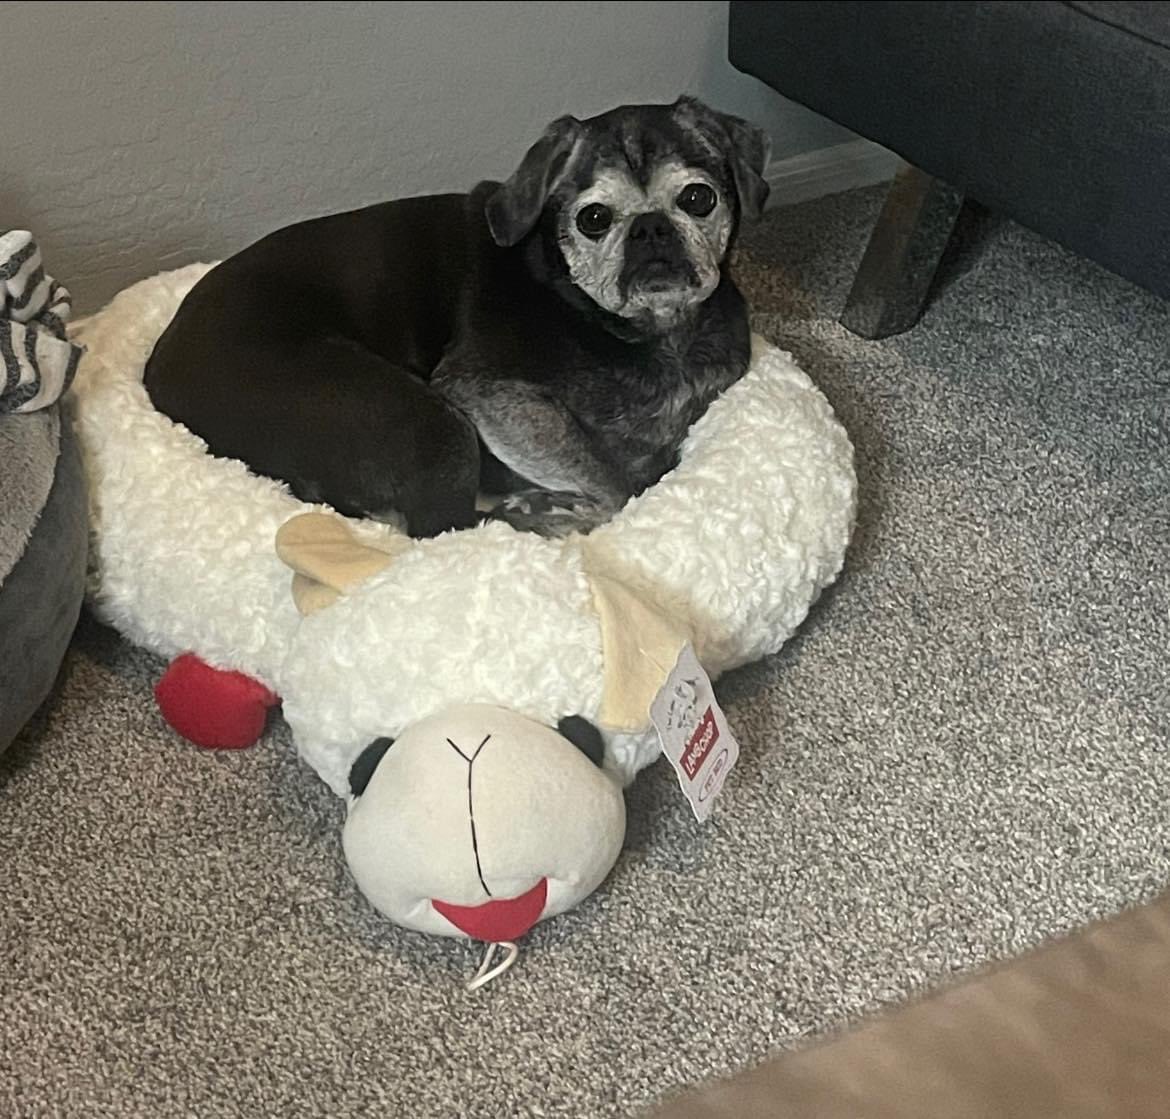 Poor Henry, got him a lamb chop bed for his birthday, but he’s had to fight for it all day! Guess we should have bought 3 of them 😂